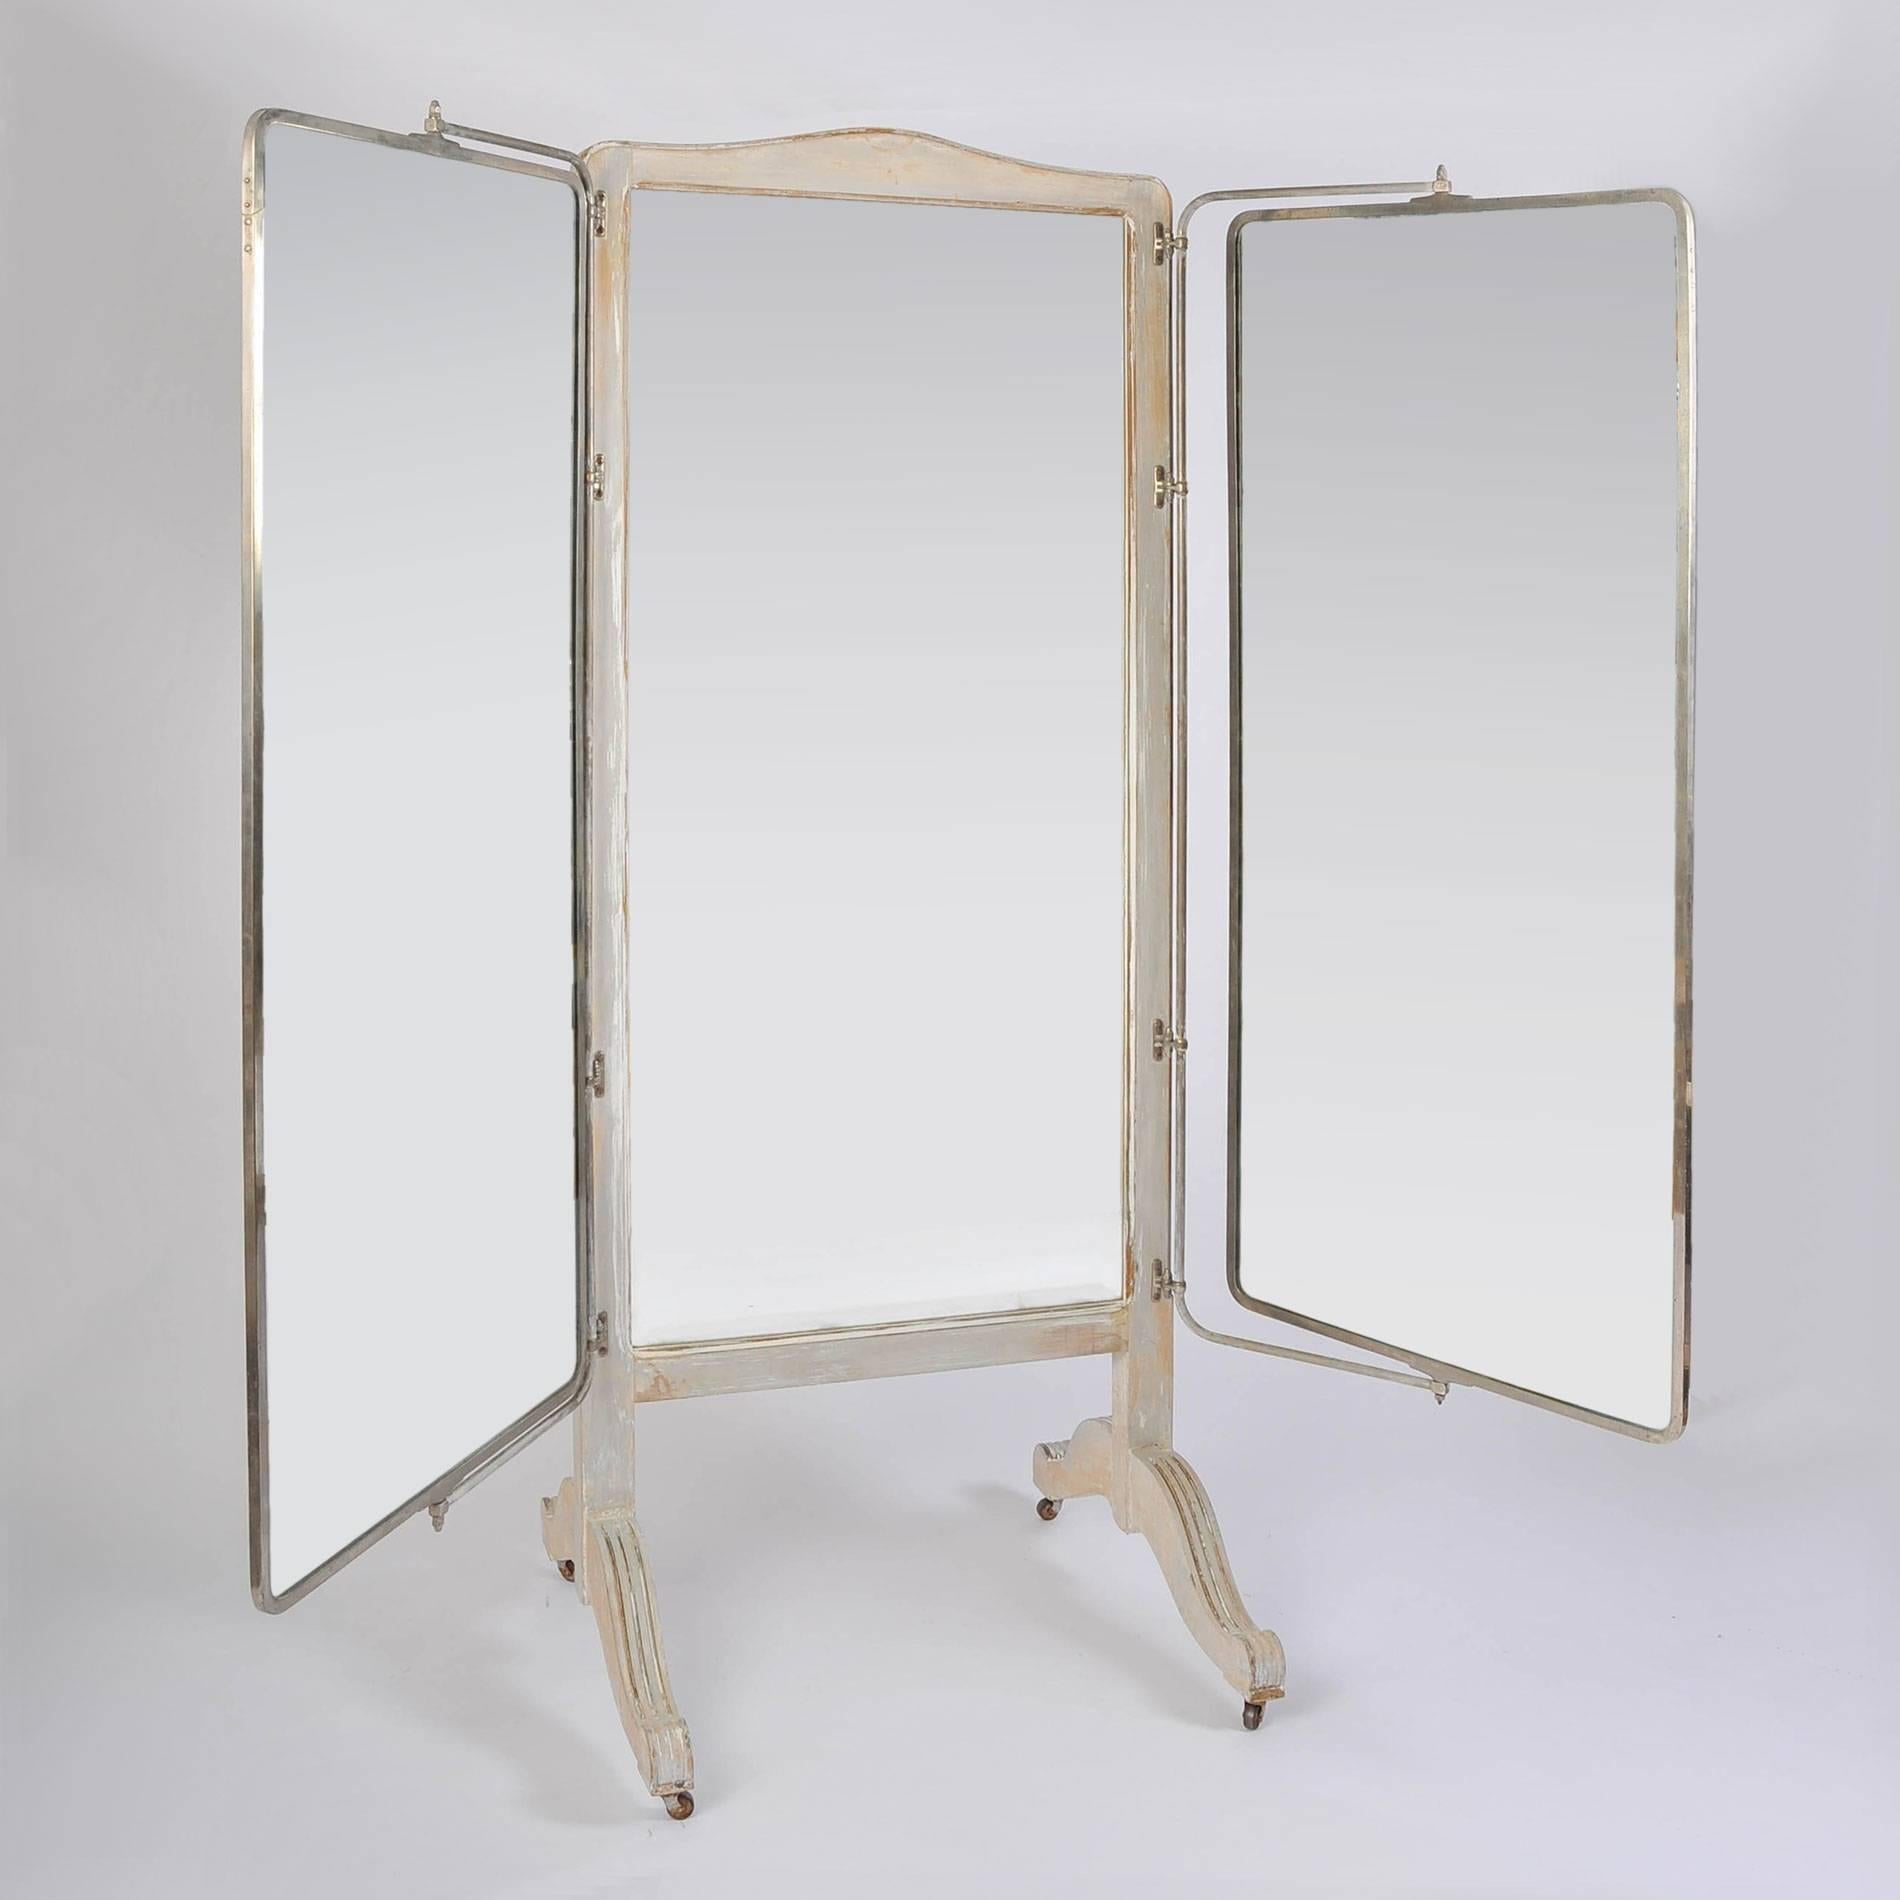 Impressive very tall free-standing triple mirror to ensure a 190% view. The curved wooden central fame and base are painted subtle grey - and generous side mirrors are supported by chrome frames ingeniously designed so that they move in all